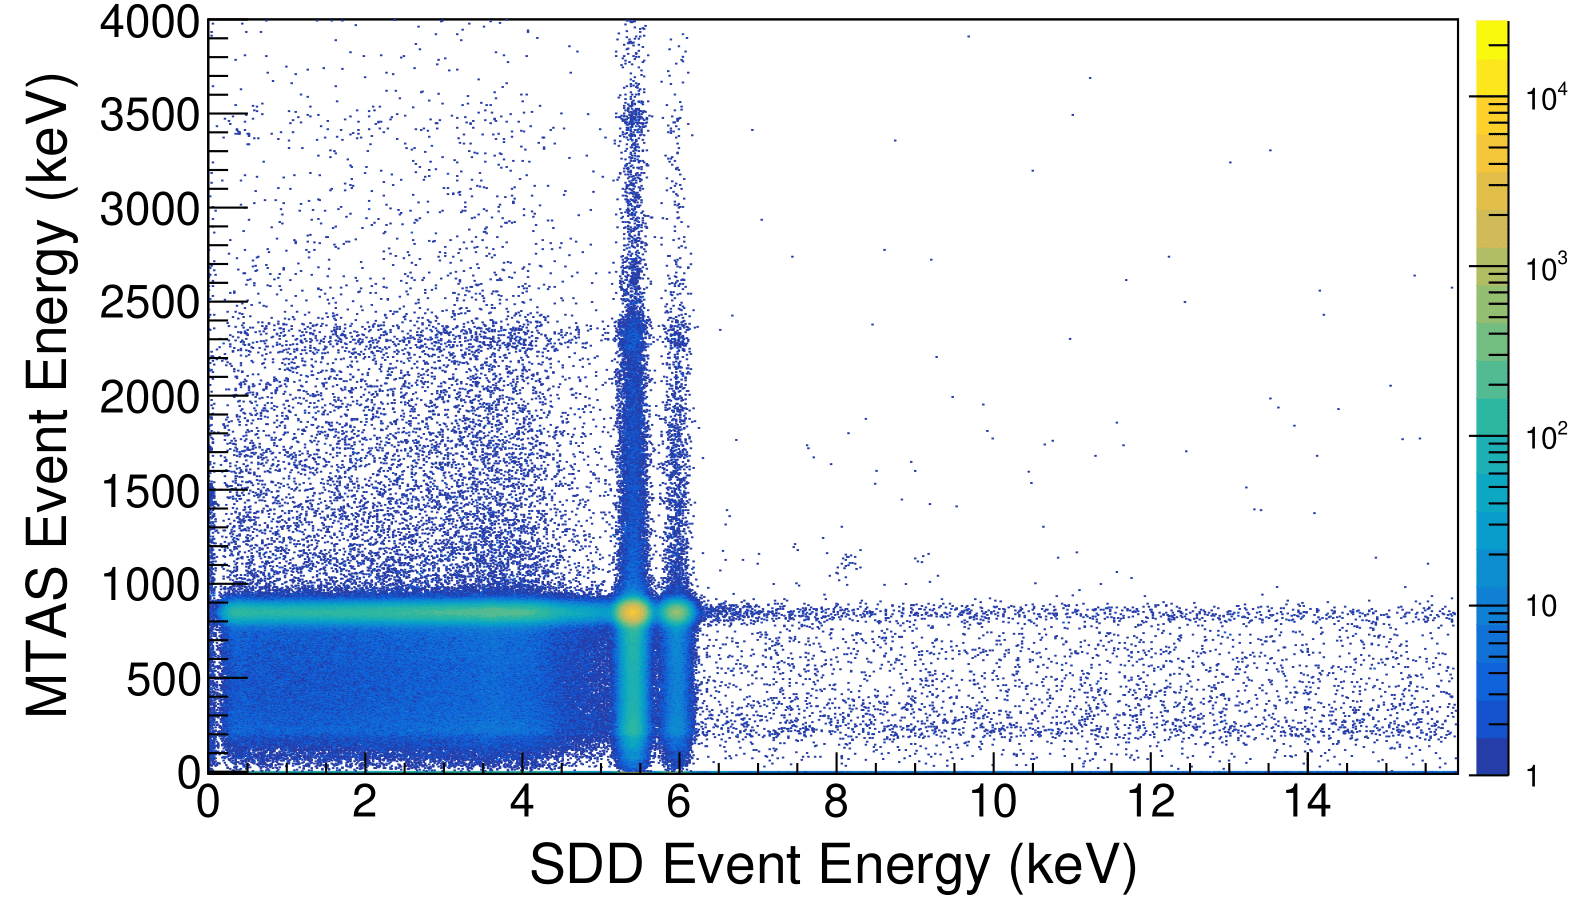 A graph showing a coincidence spectrum in blue (low) to yellow (high) against MTAS Event Energy (keV) on the vertical axis and SDD Event Energy (keV) on the horizontal axis. The vertical axis is 0-4000, the horizontal axis is 0-15, and the colour bar on the right is 1 (dark blue) to approximately 10,000 (bright yellow). There are three discernable lines on the plot created by data points at approximately 5.5 and 6 on the horizontal axis (vertical lines), and 800 on the vertical axis (horizontal line). The parameter space beneath 800 and to the left of 5.5 is mostly dark blue with the outside lines becoming light teal, and the point (5.5,800) is yellow.